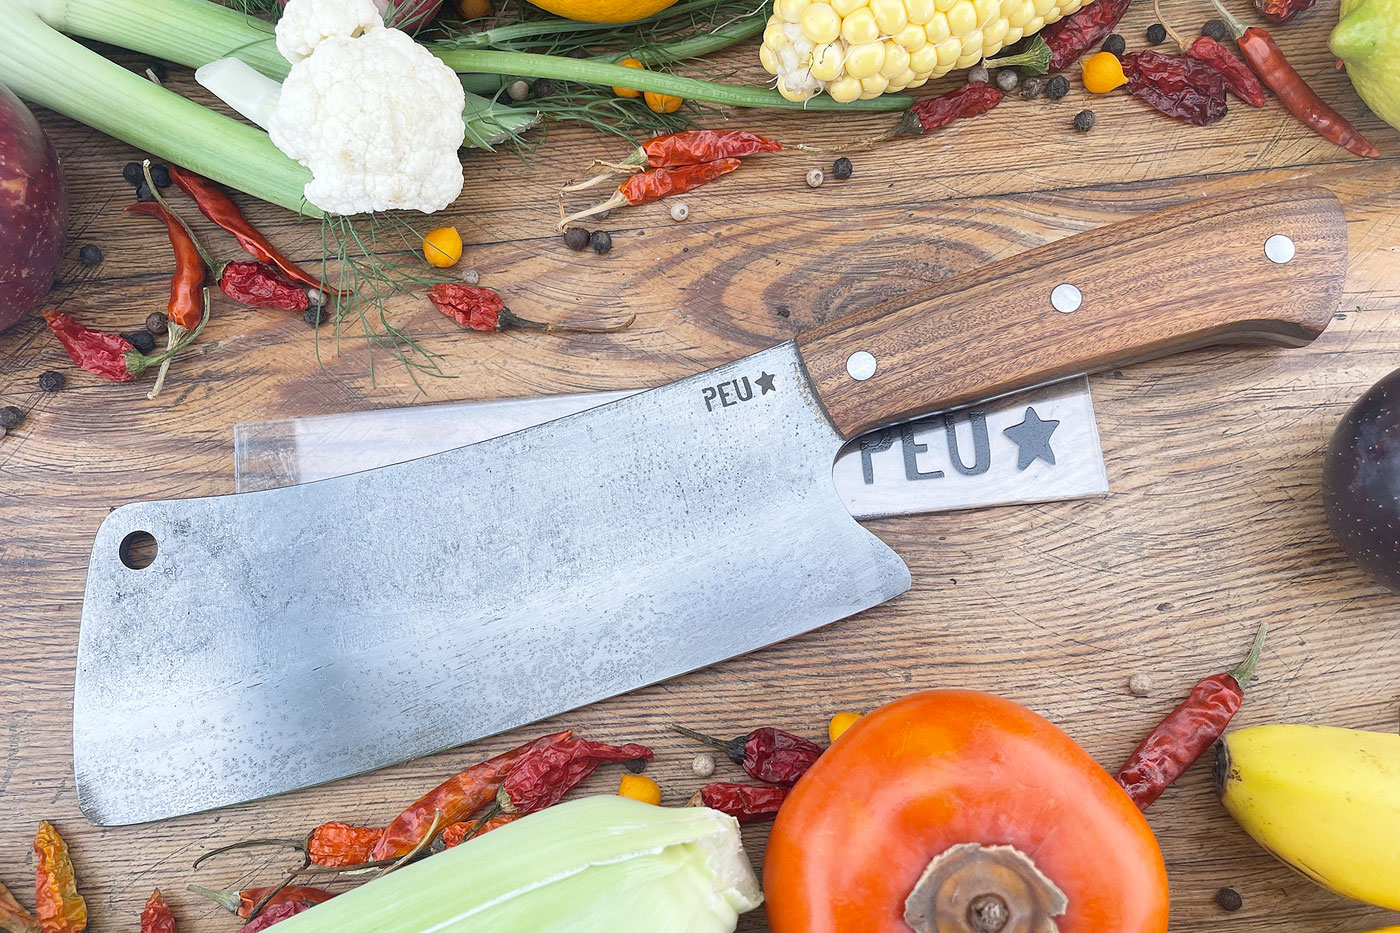 Meat Cleaver with Jacaranda and O2 Carbon Steel